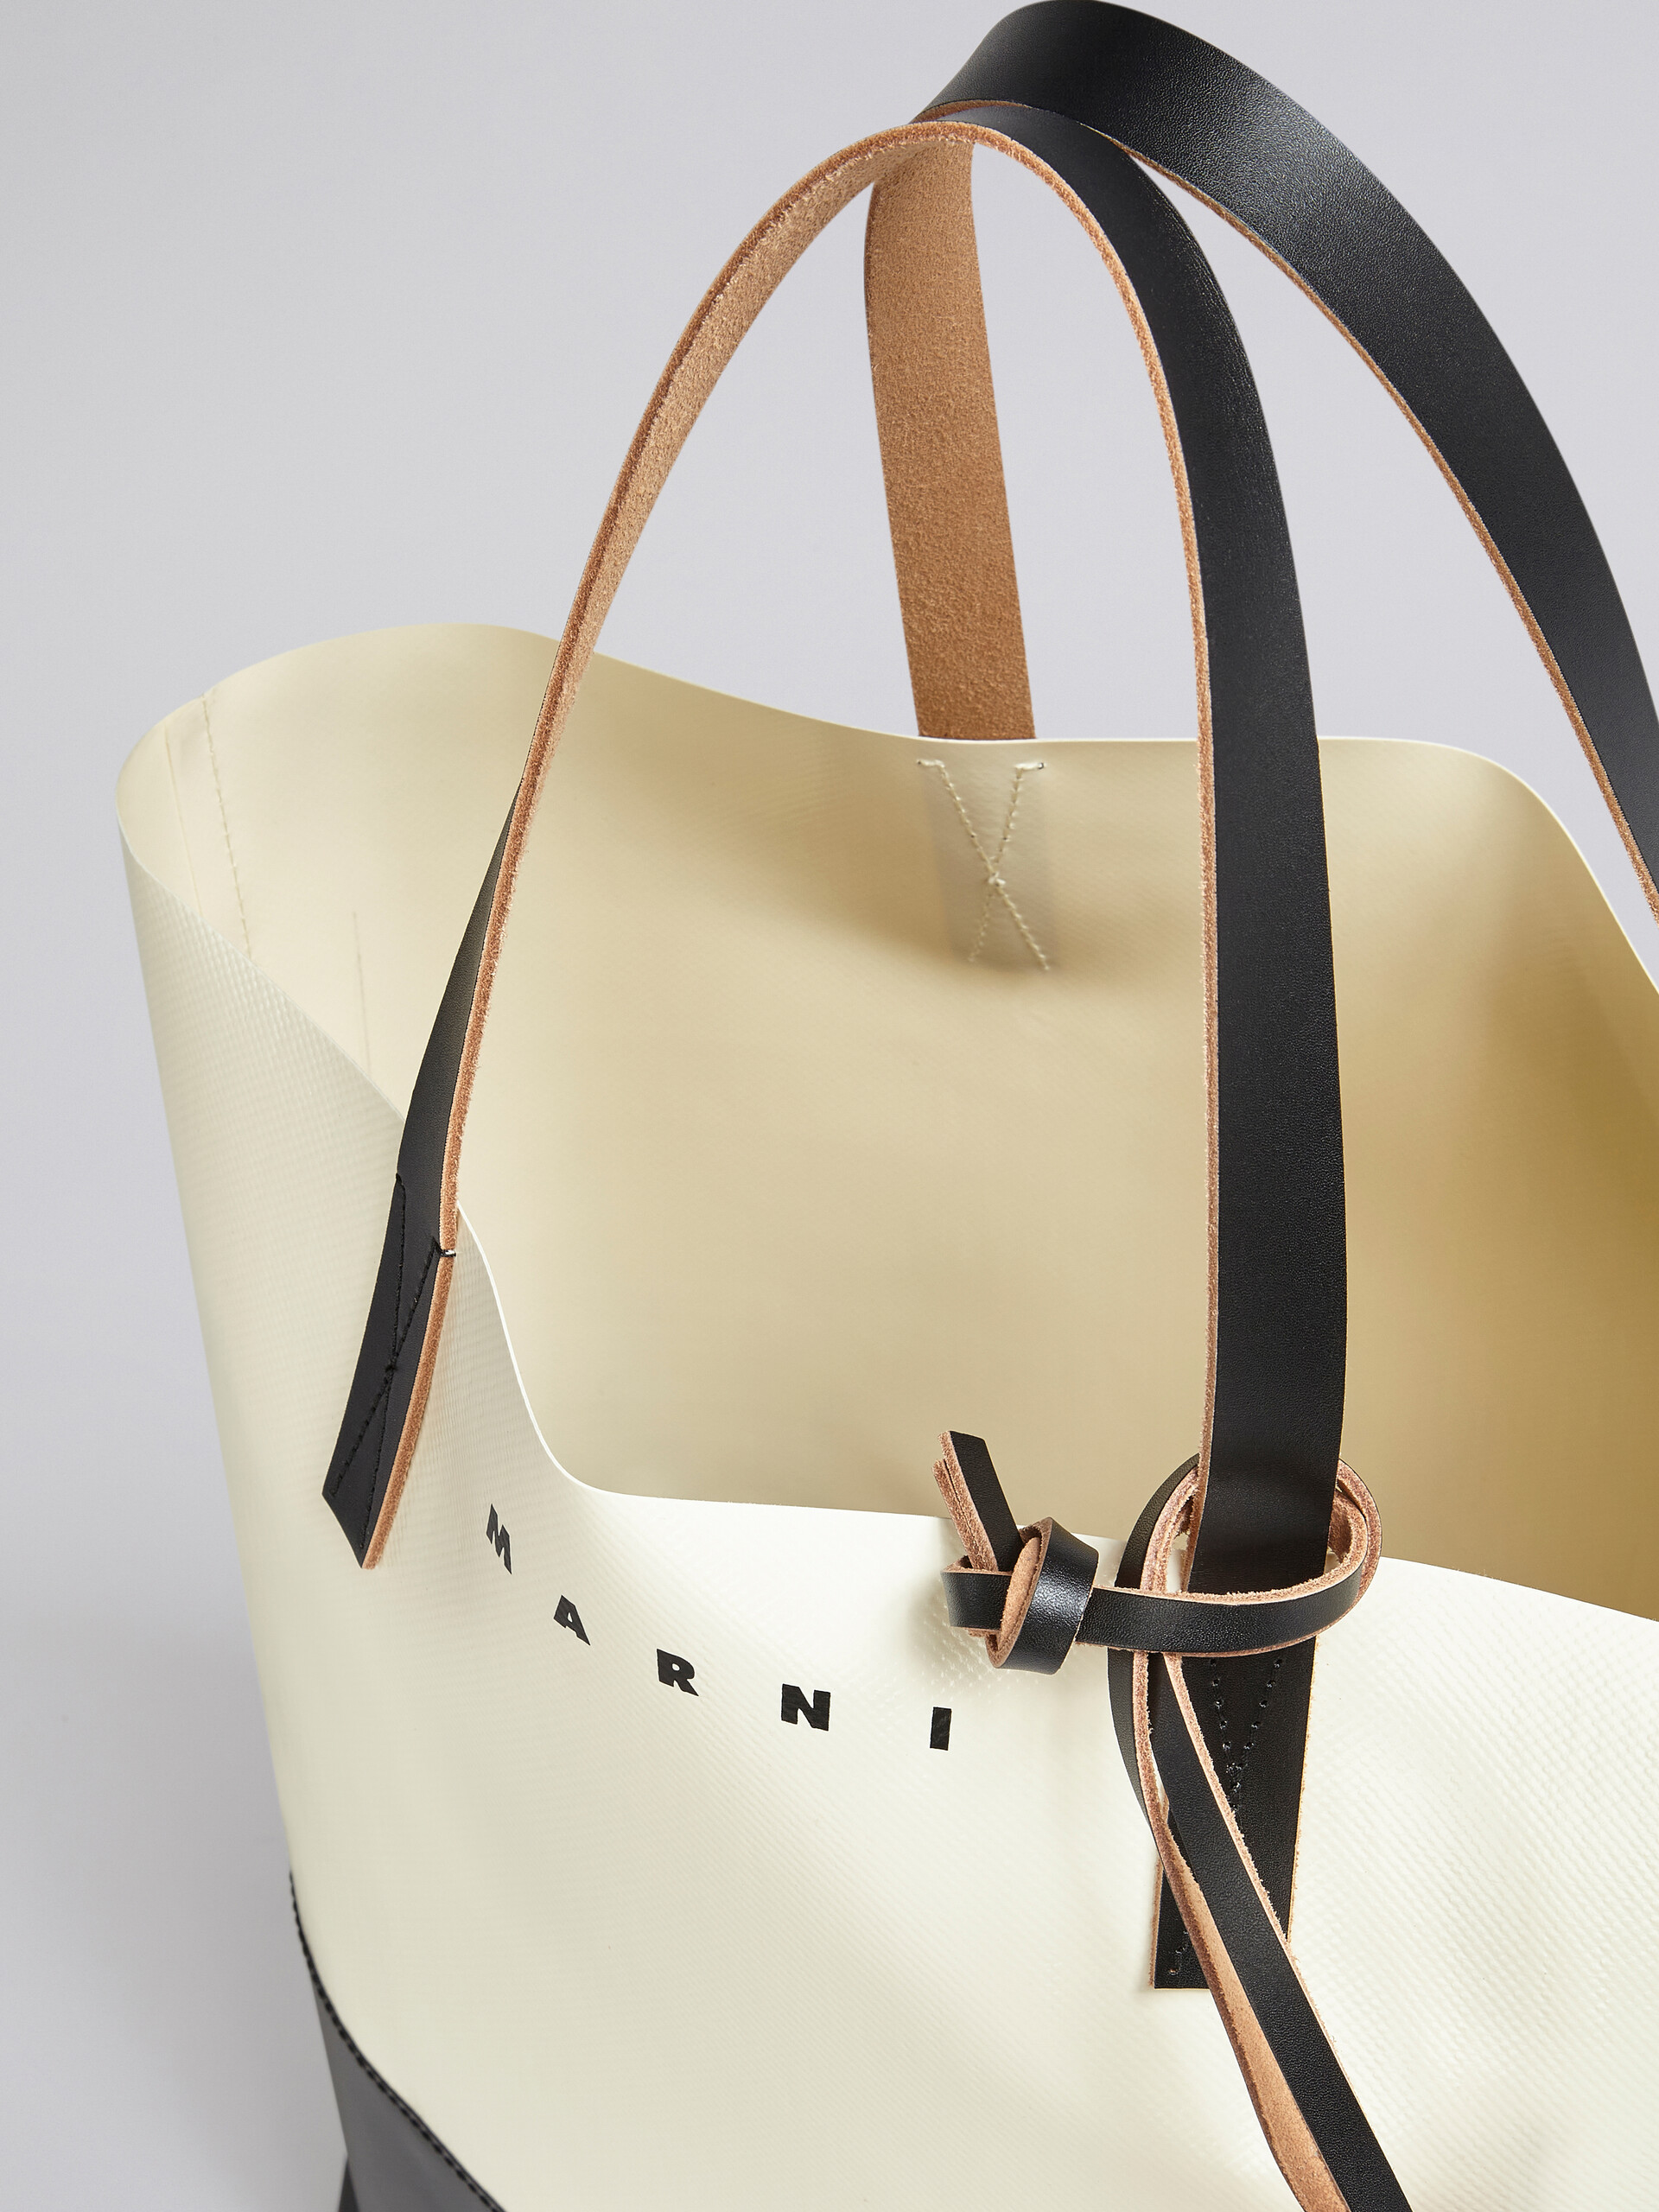 Tribeca shopping bag in white and black